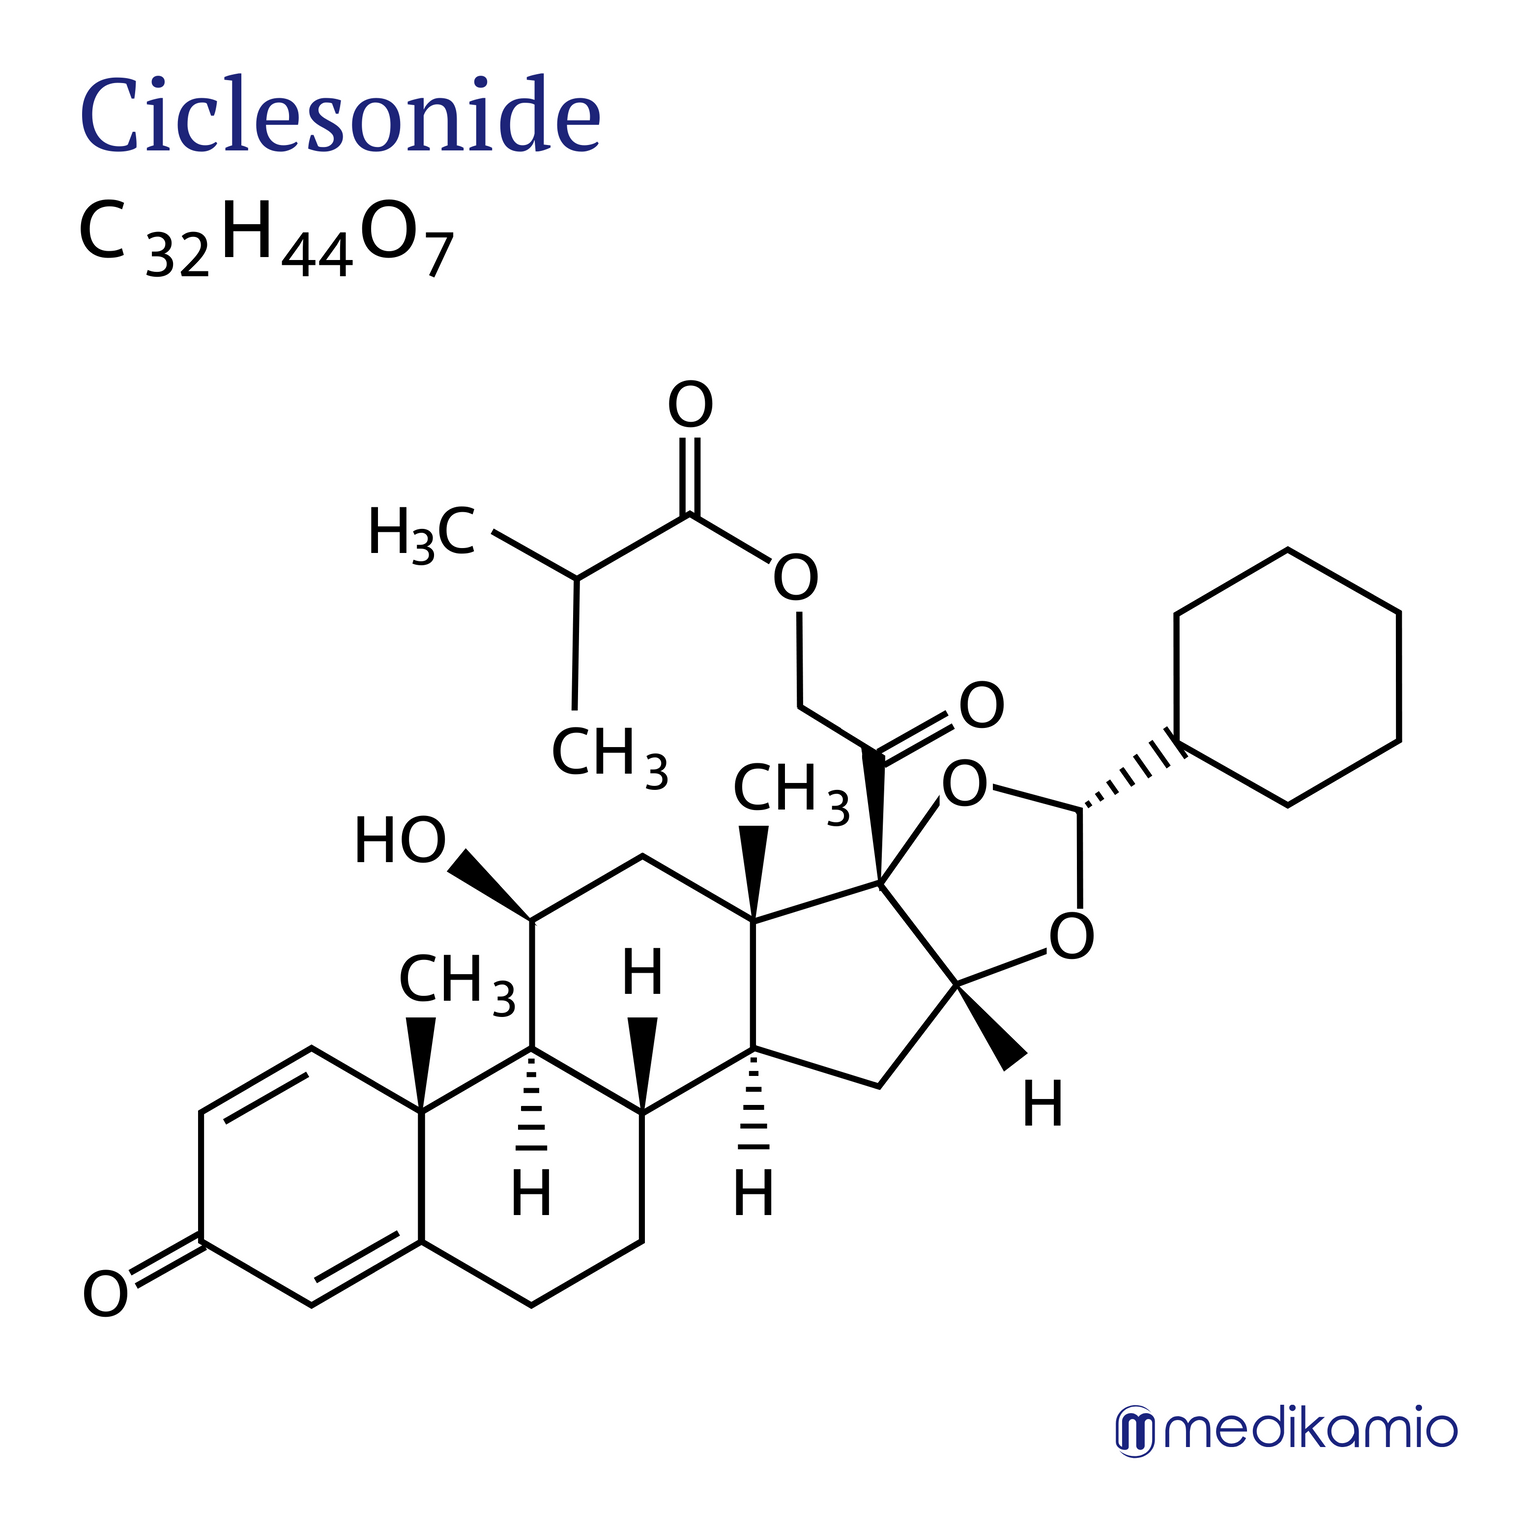 Graphic structural formula of the active ingredient ciclesonide